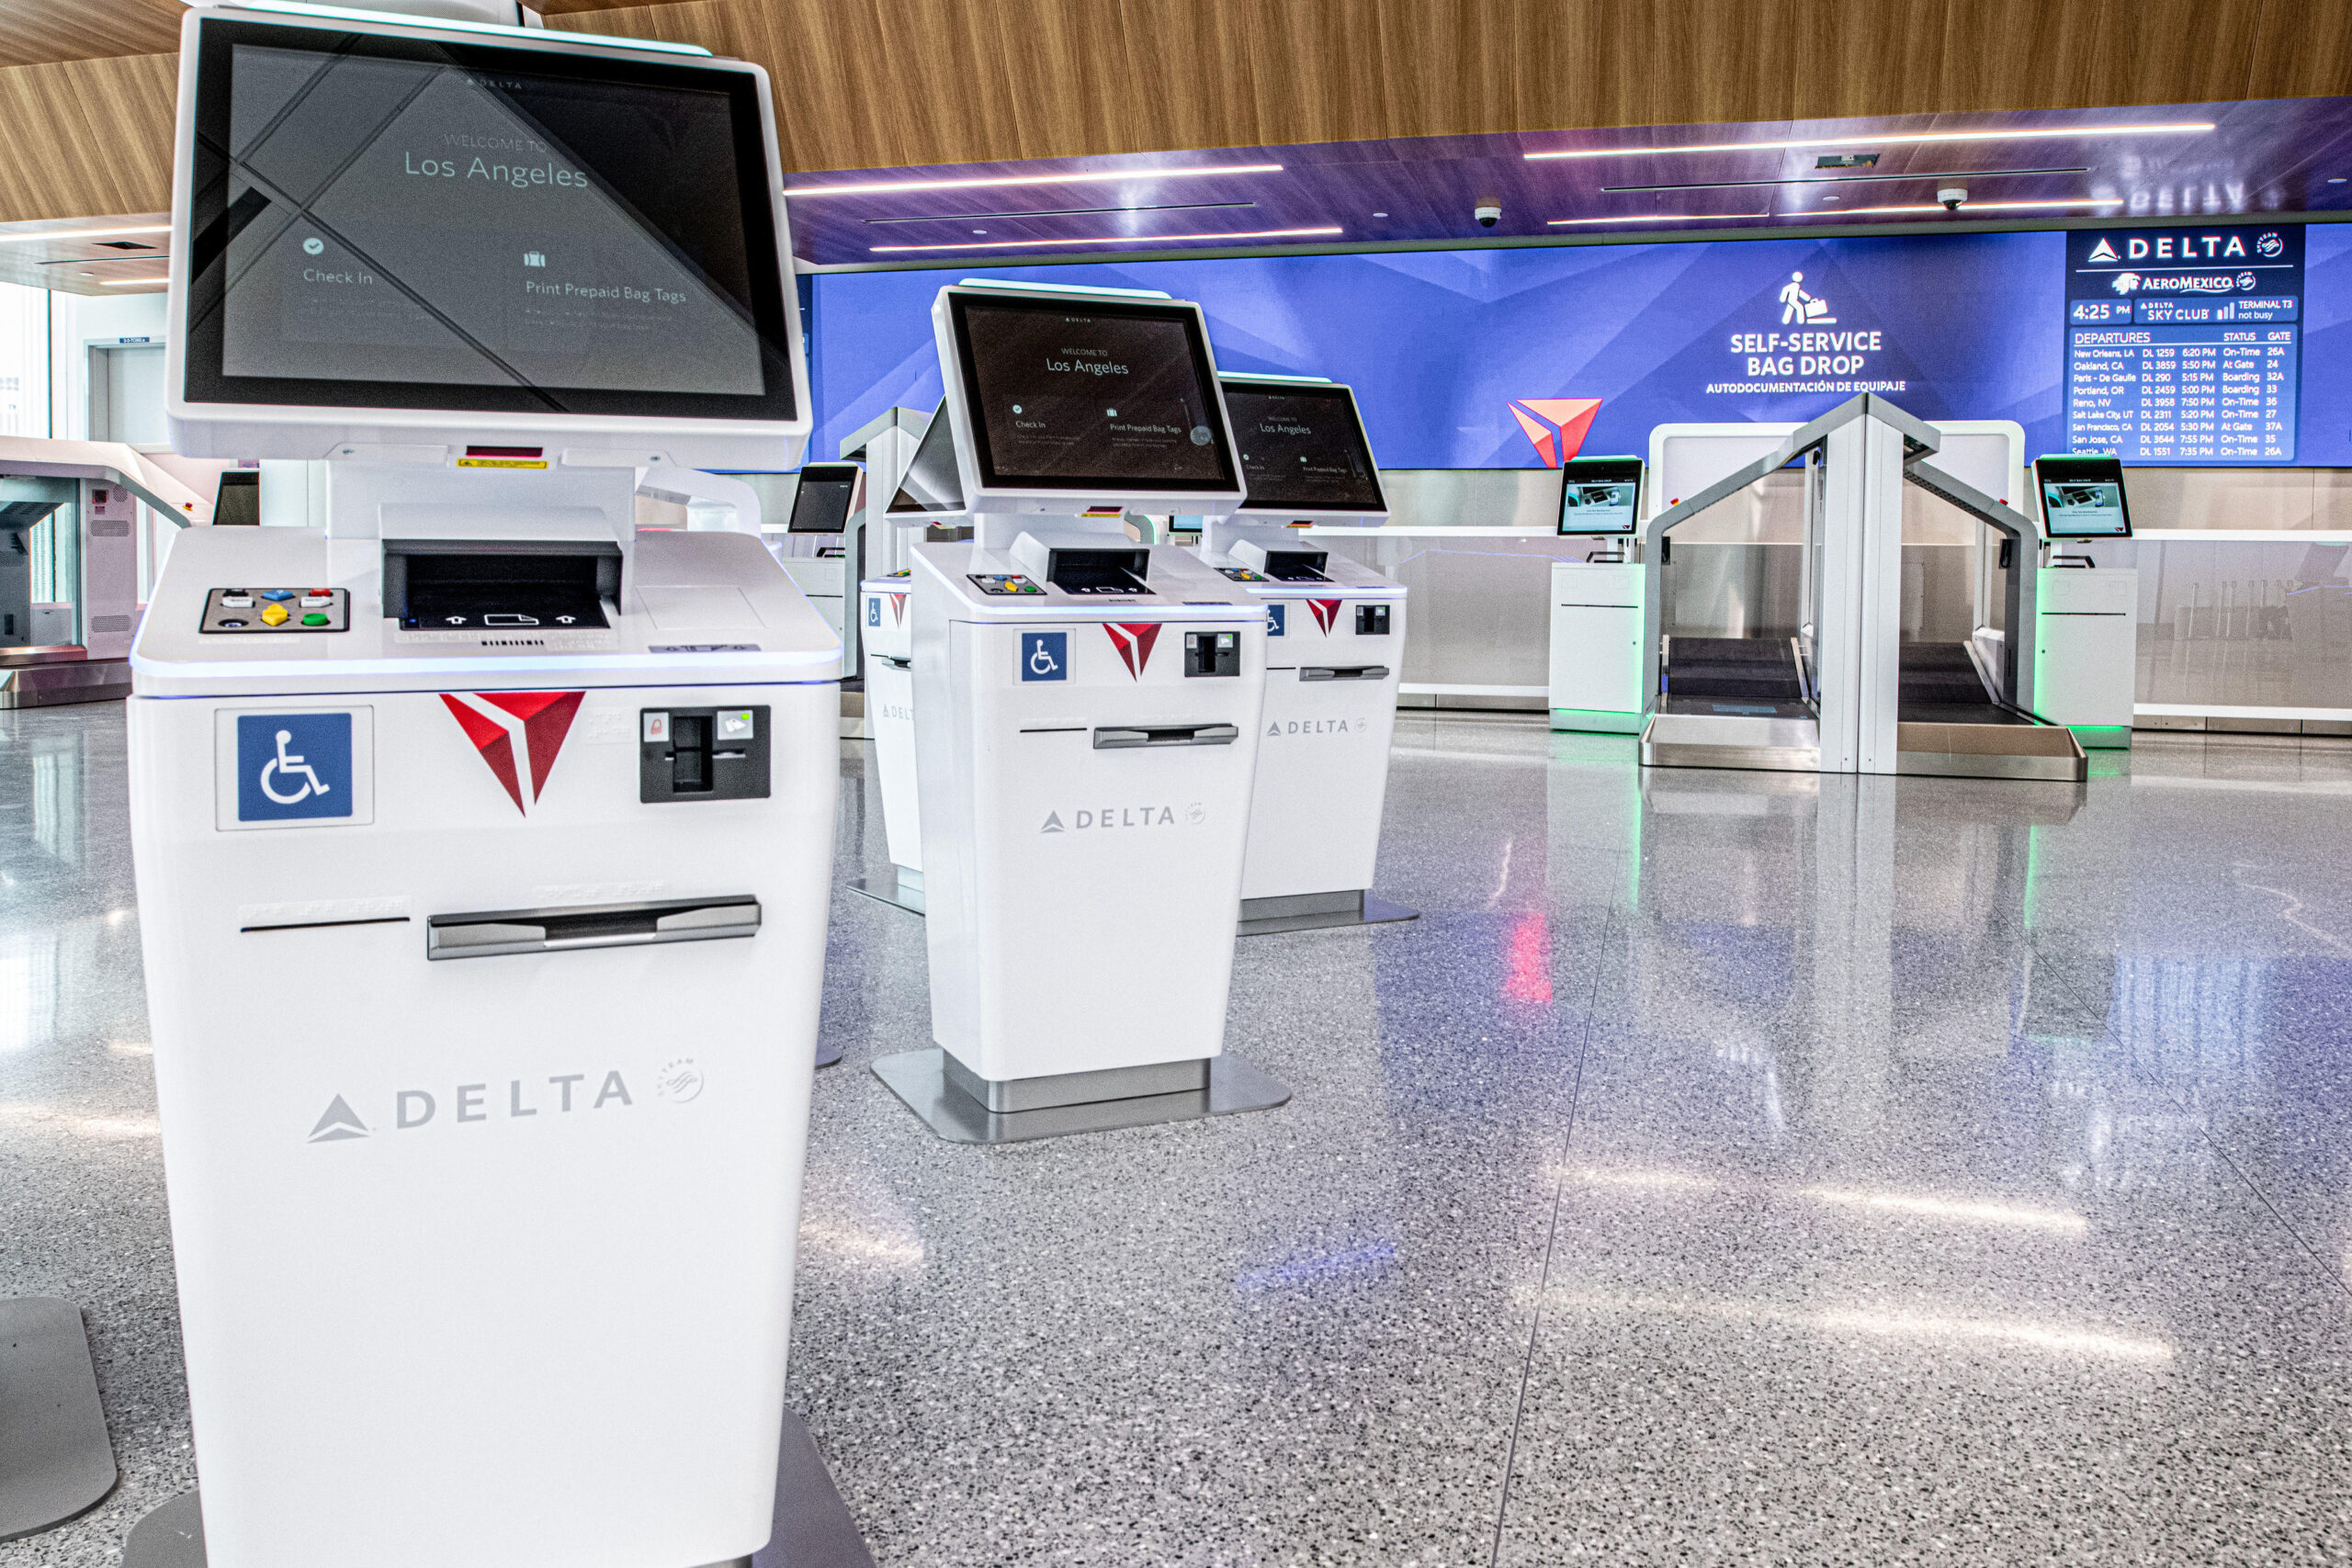 Self-service check-in and bag-drog kiosks at LAX's new west headhouse